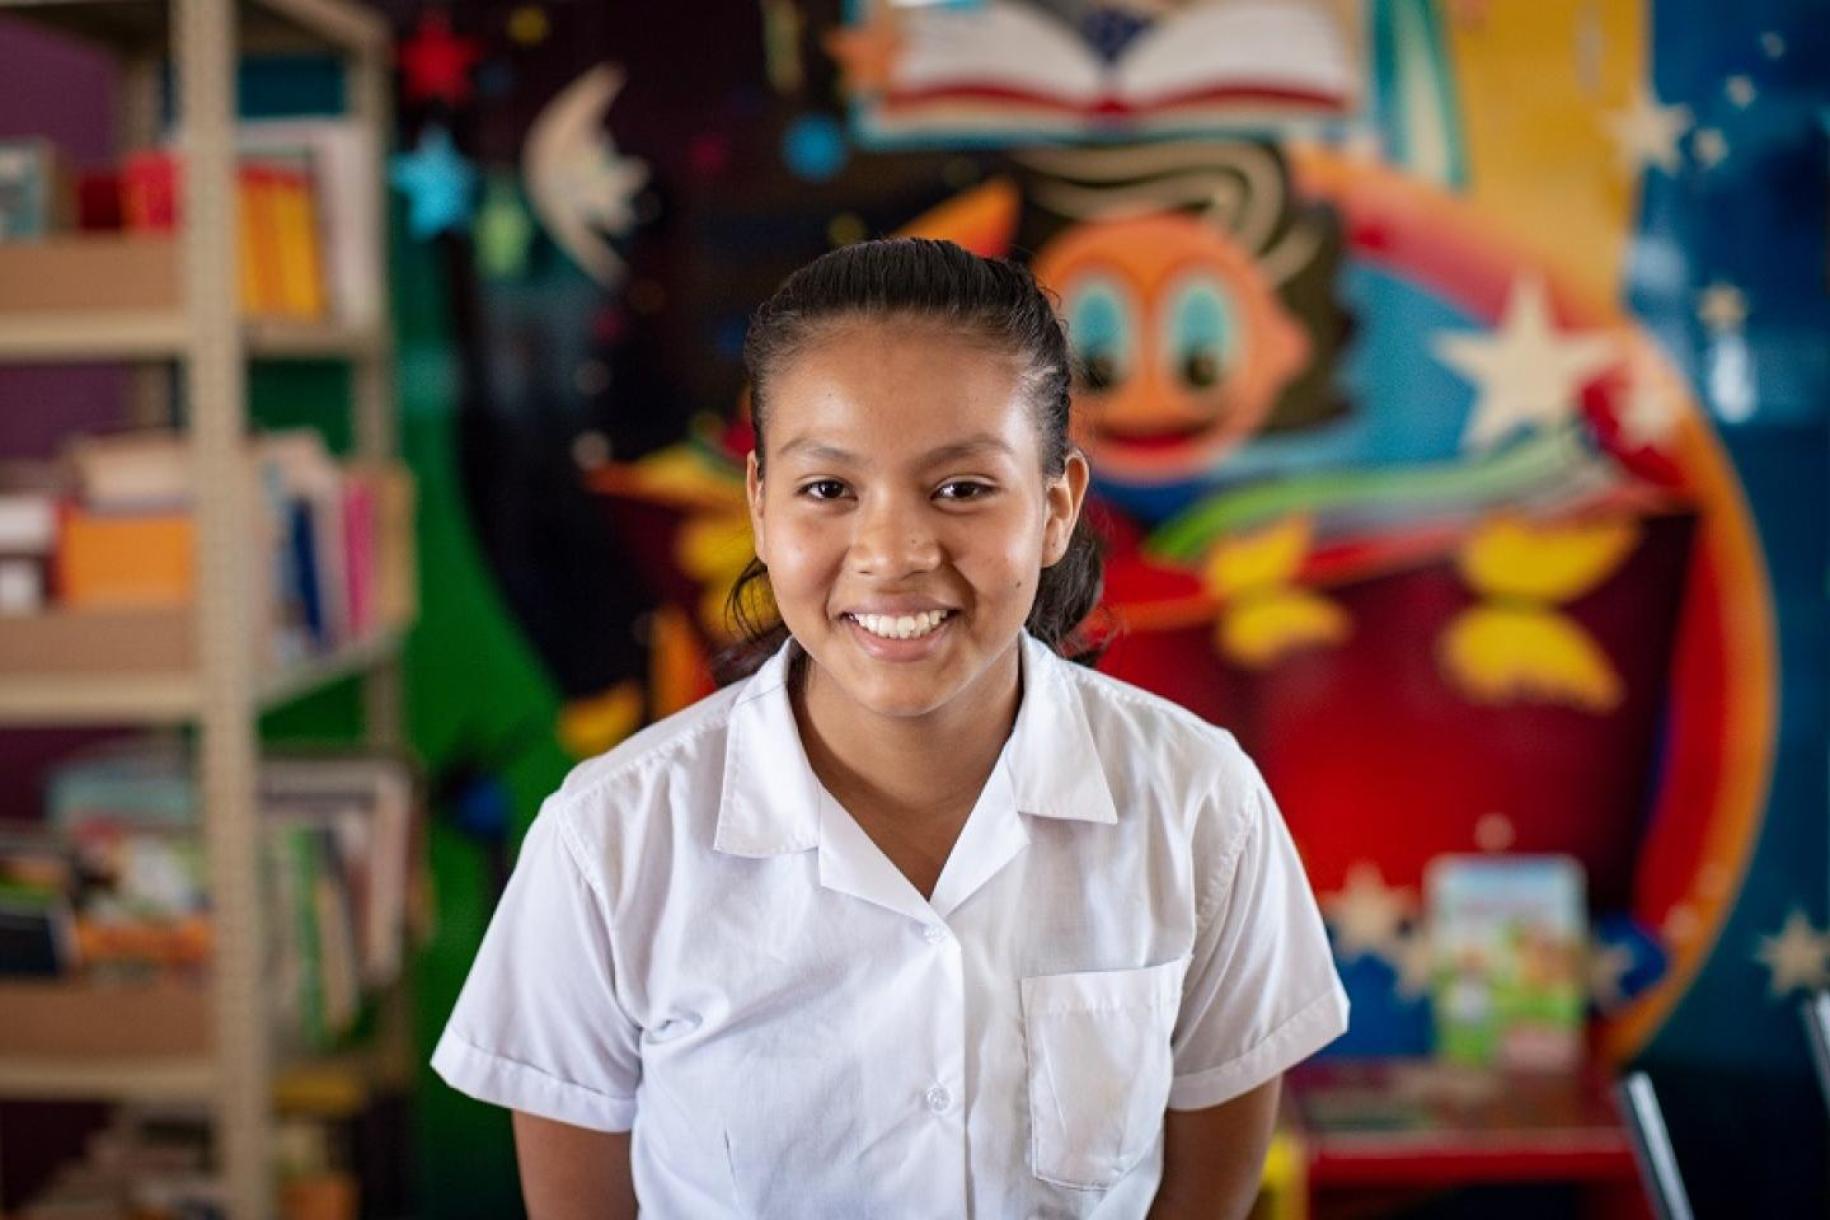 A girl wearing her school uniform smiles at the camera and stands in front of a colourful mural and a shelf full of books.